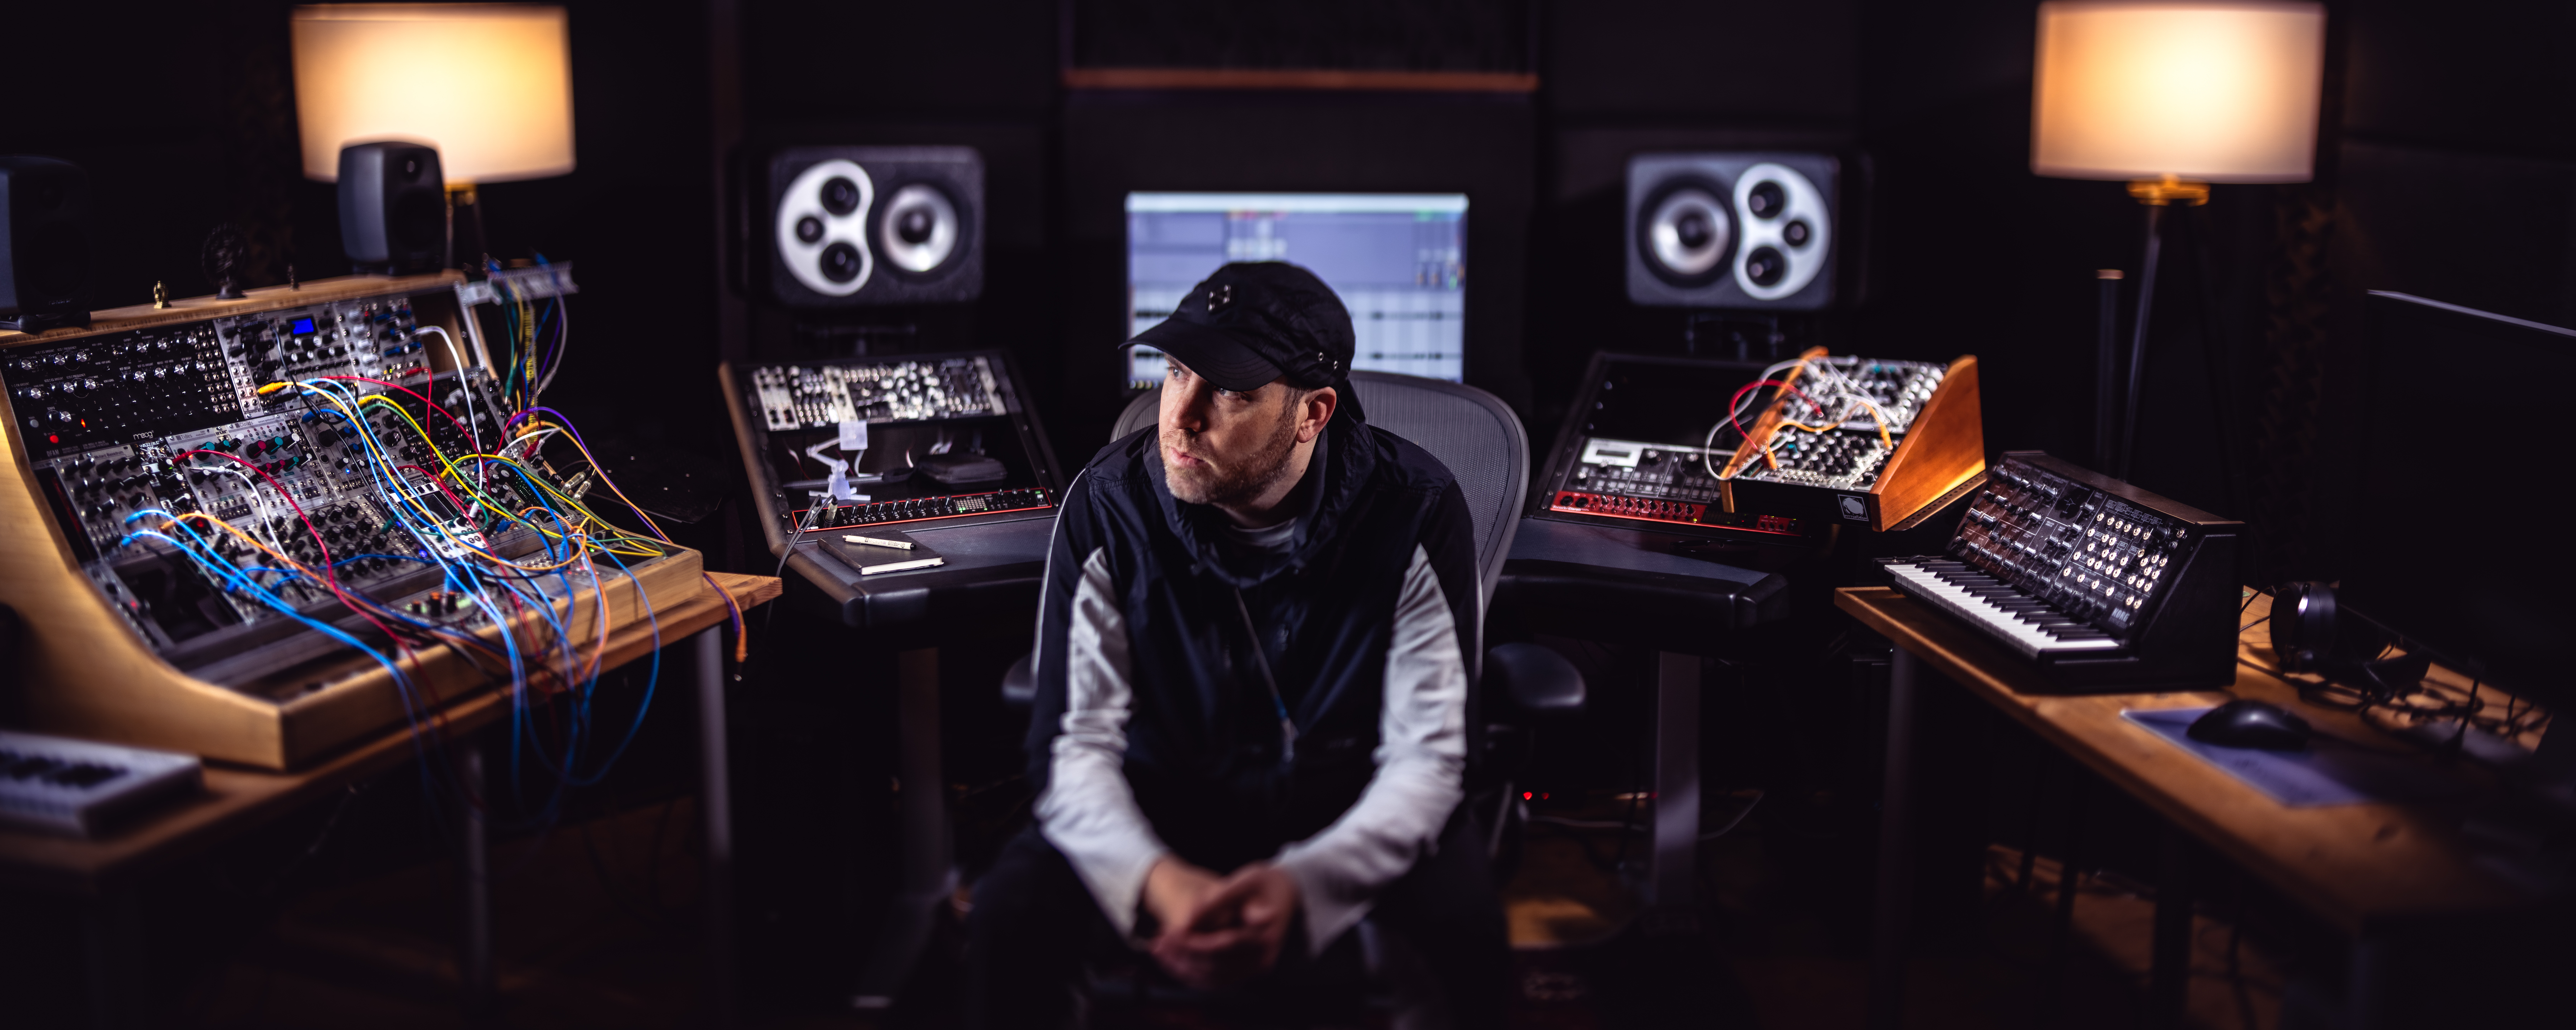 Photo of man in a black hat in a studio with equipment and wires laying across them